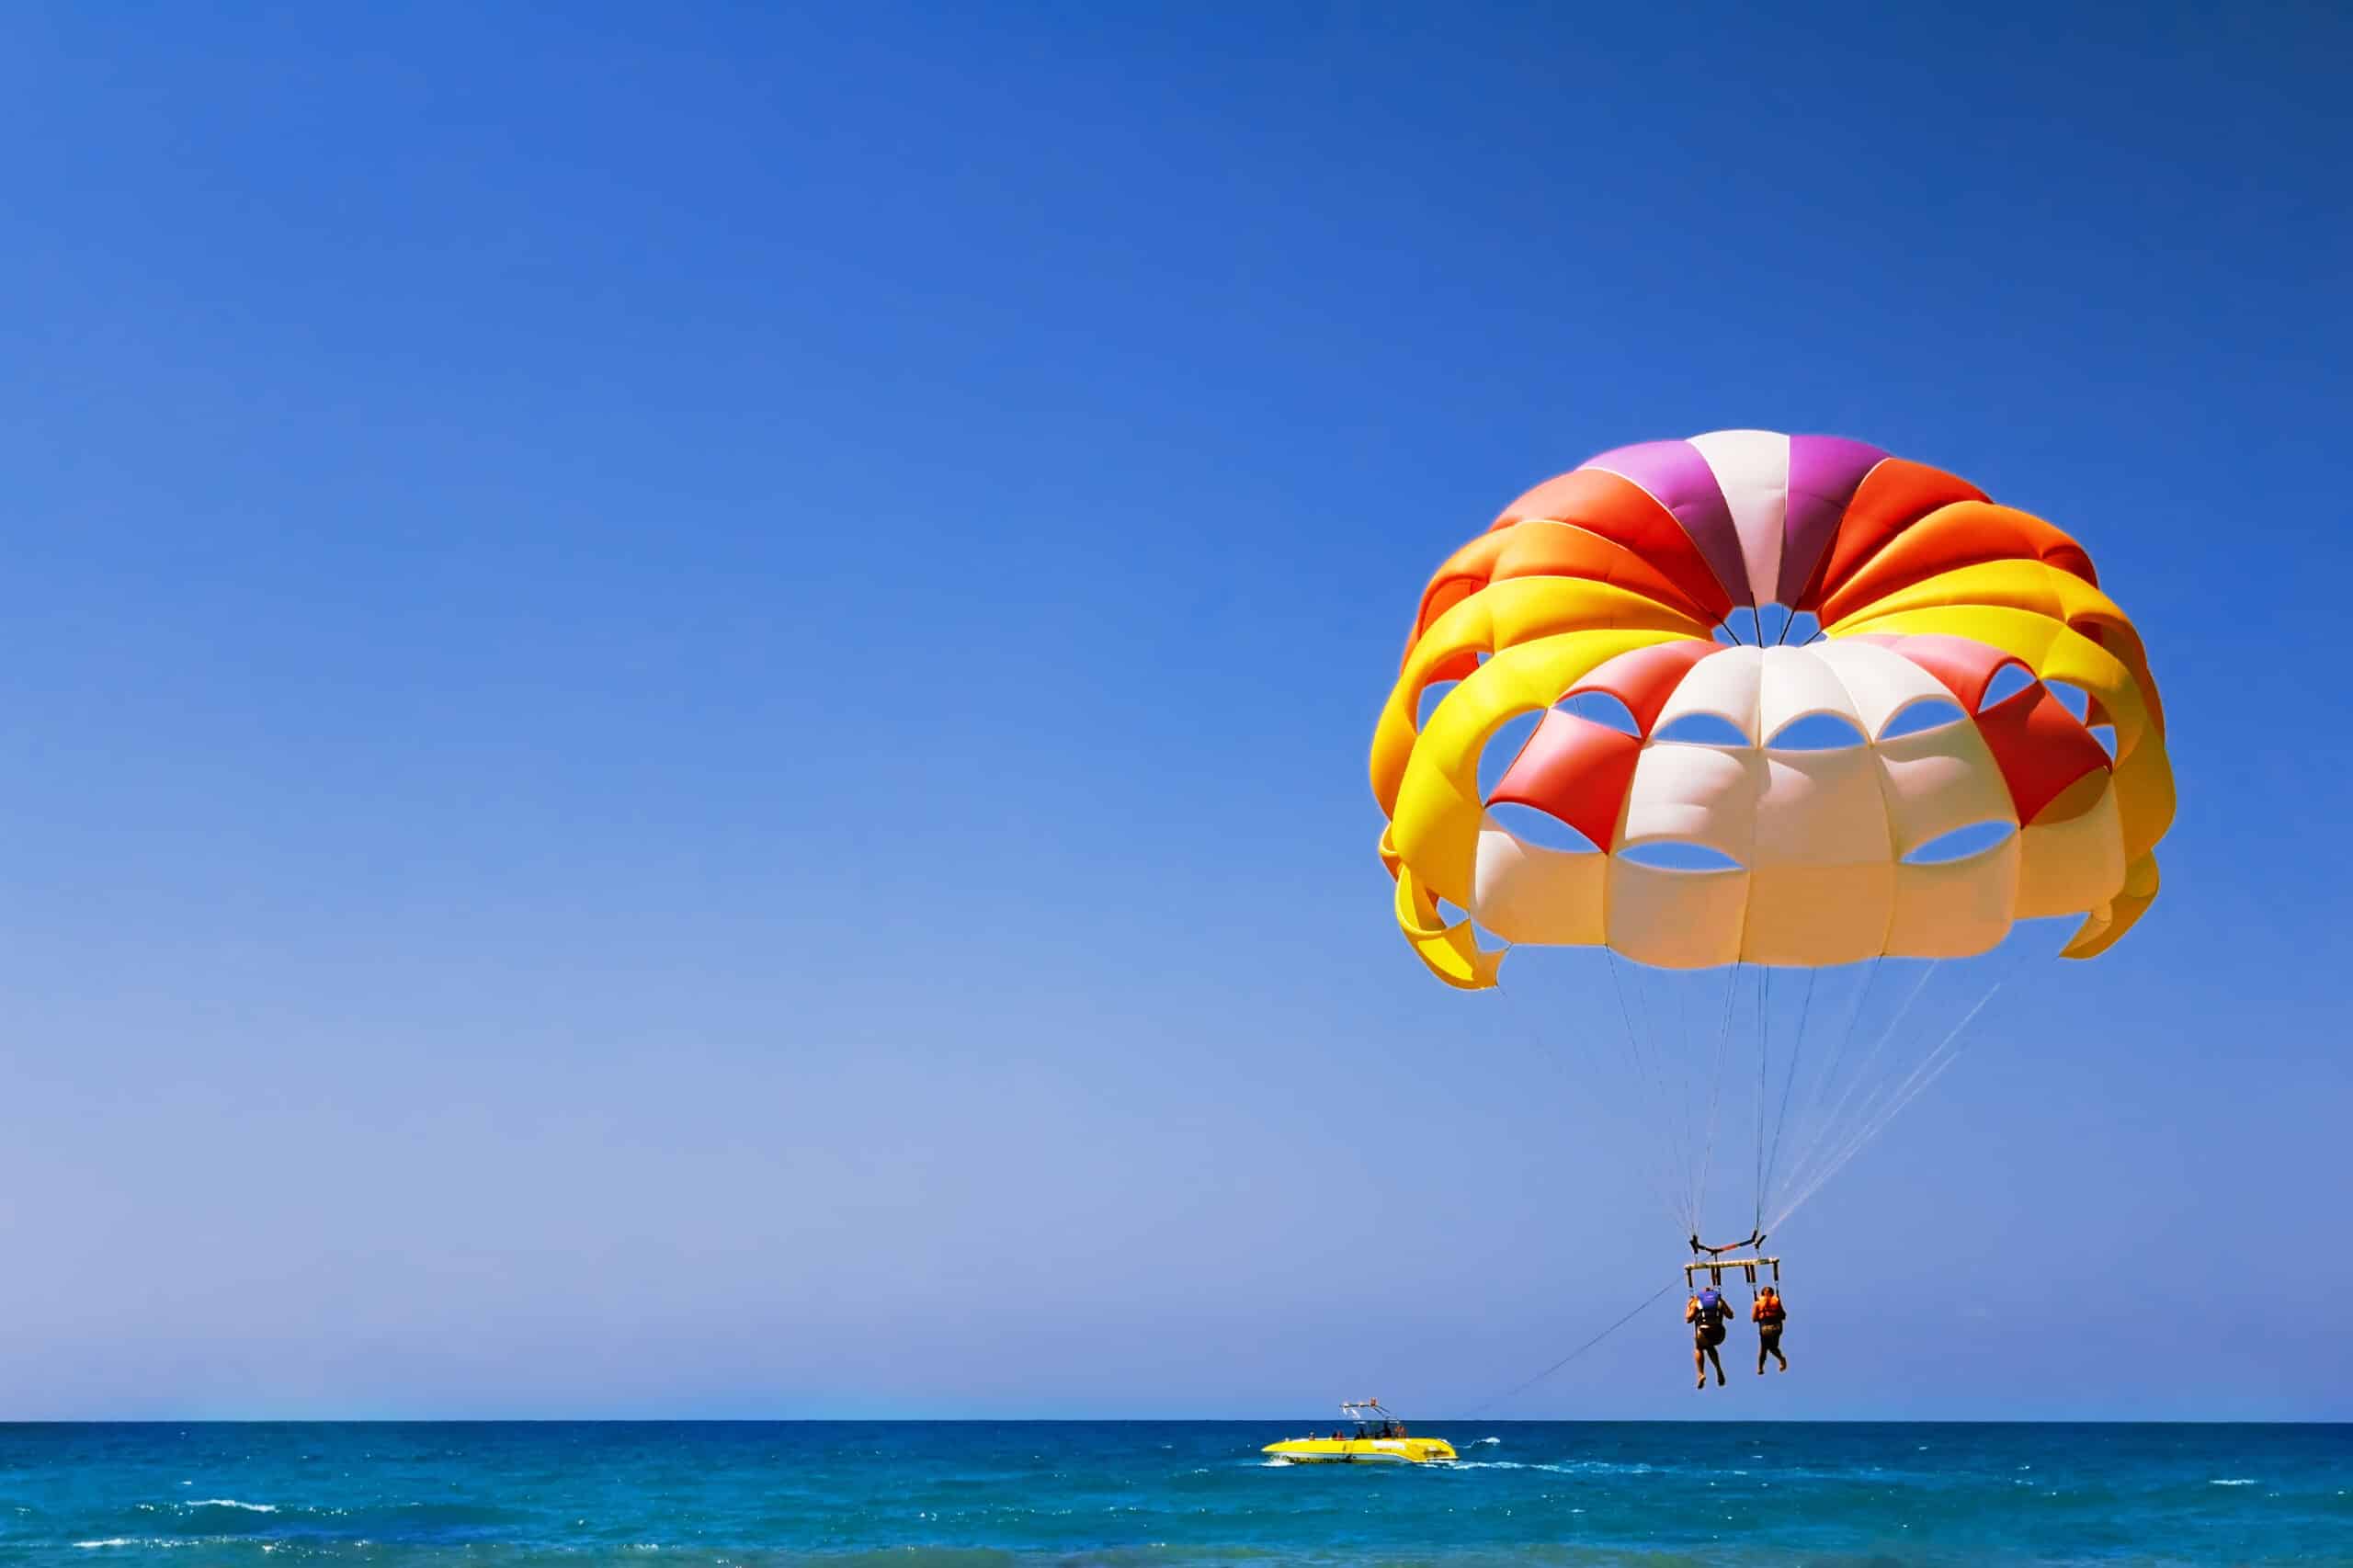 A large parachute with two girls flies in the air over the sea."n